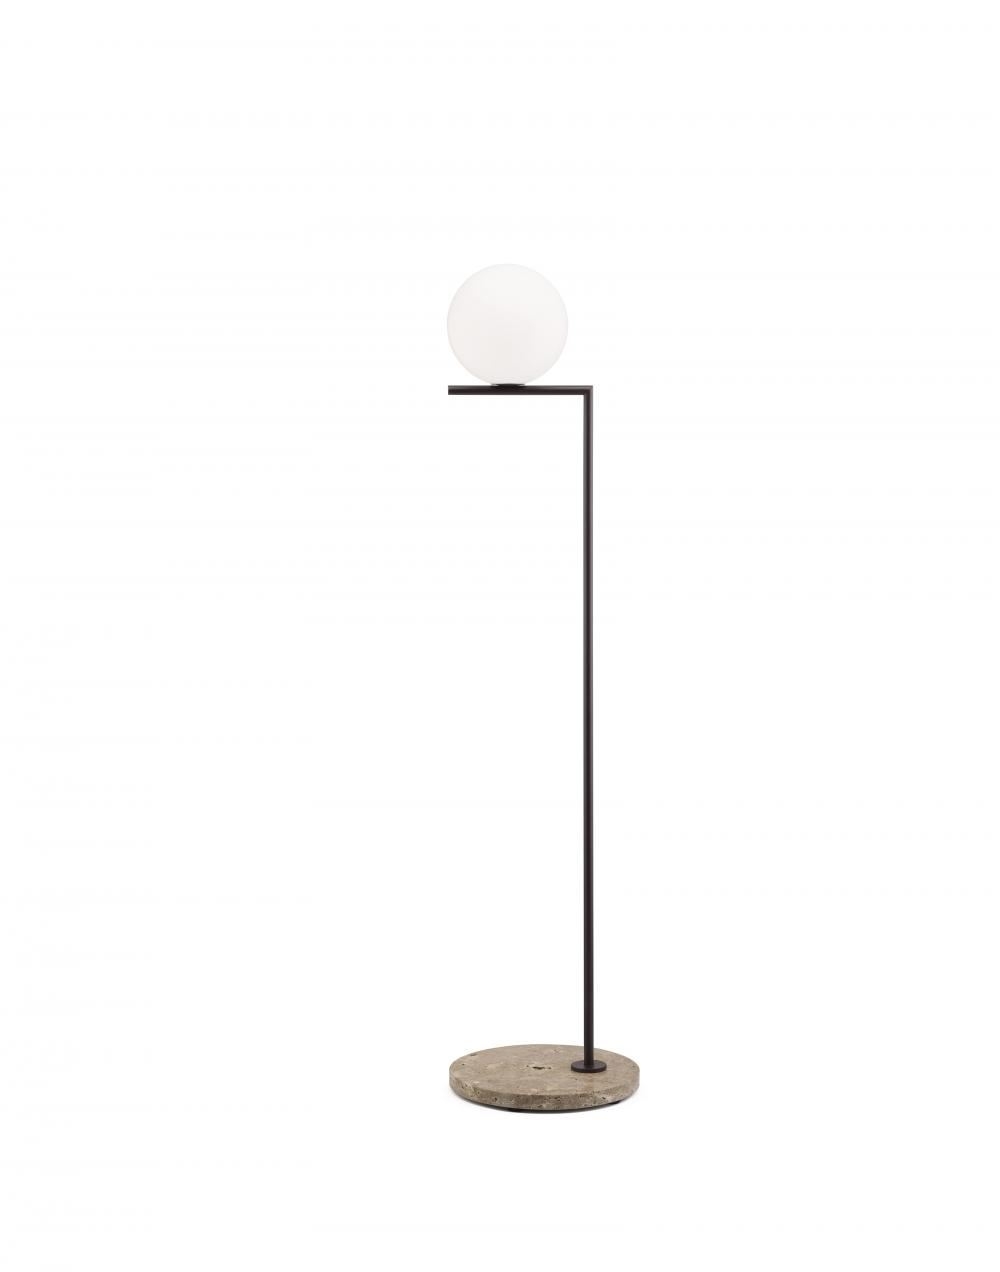 Ic Floor Light Outdoor Small Deep Brown Imperial Travertine Stone Base